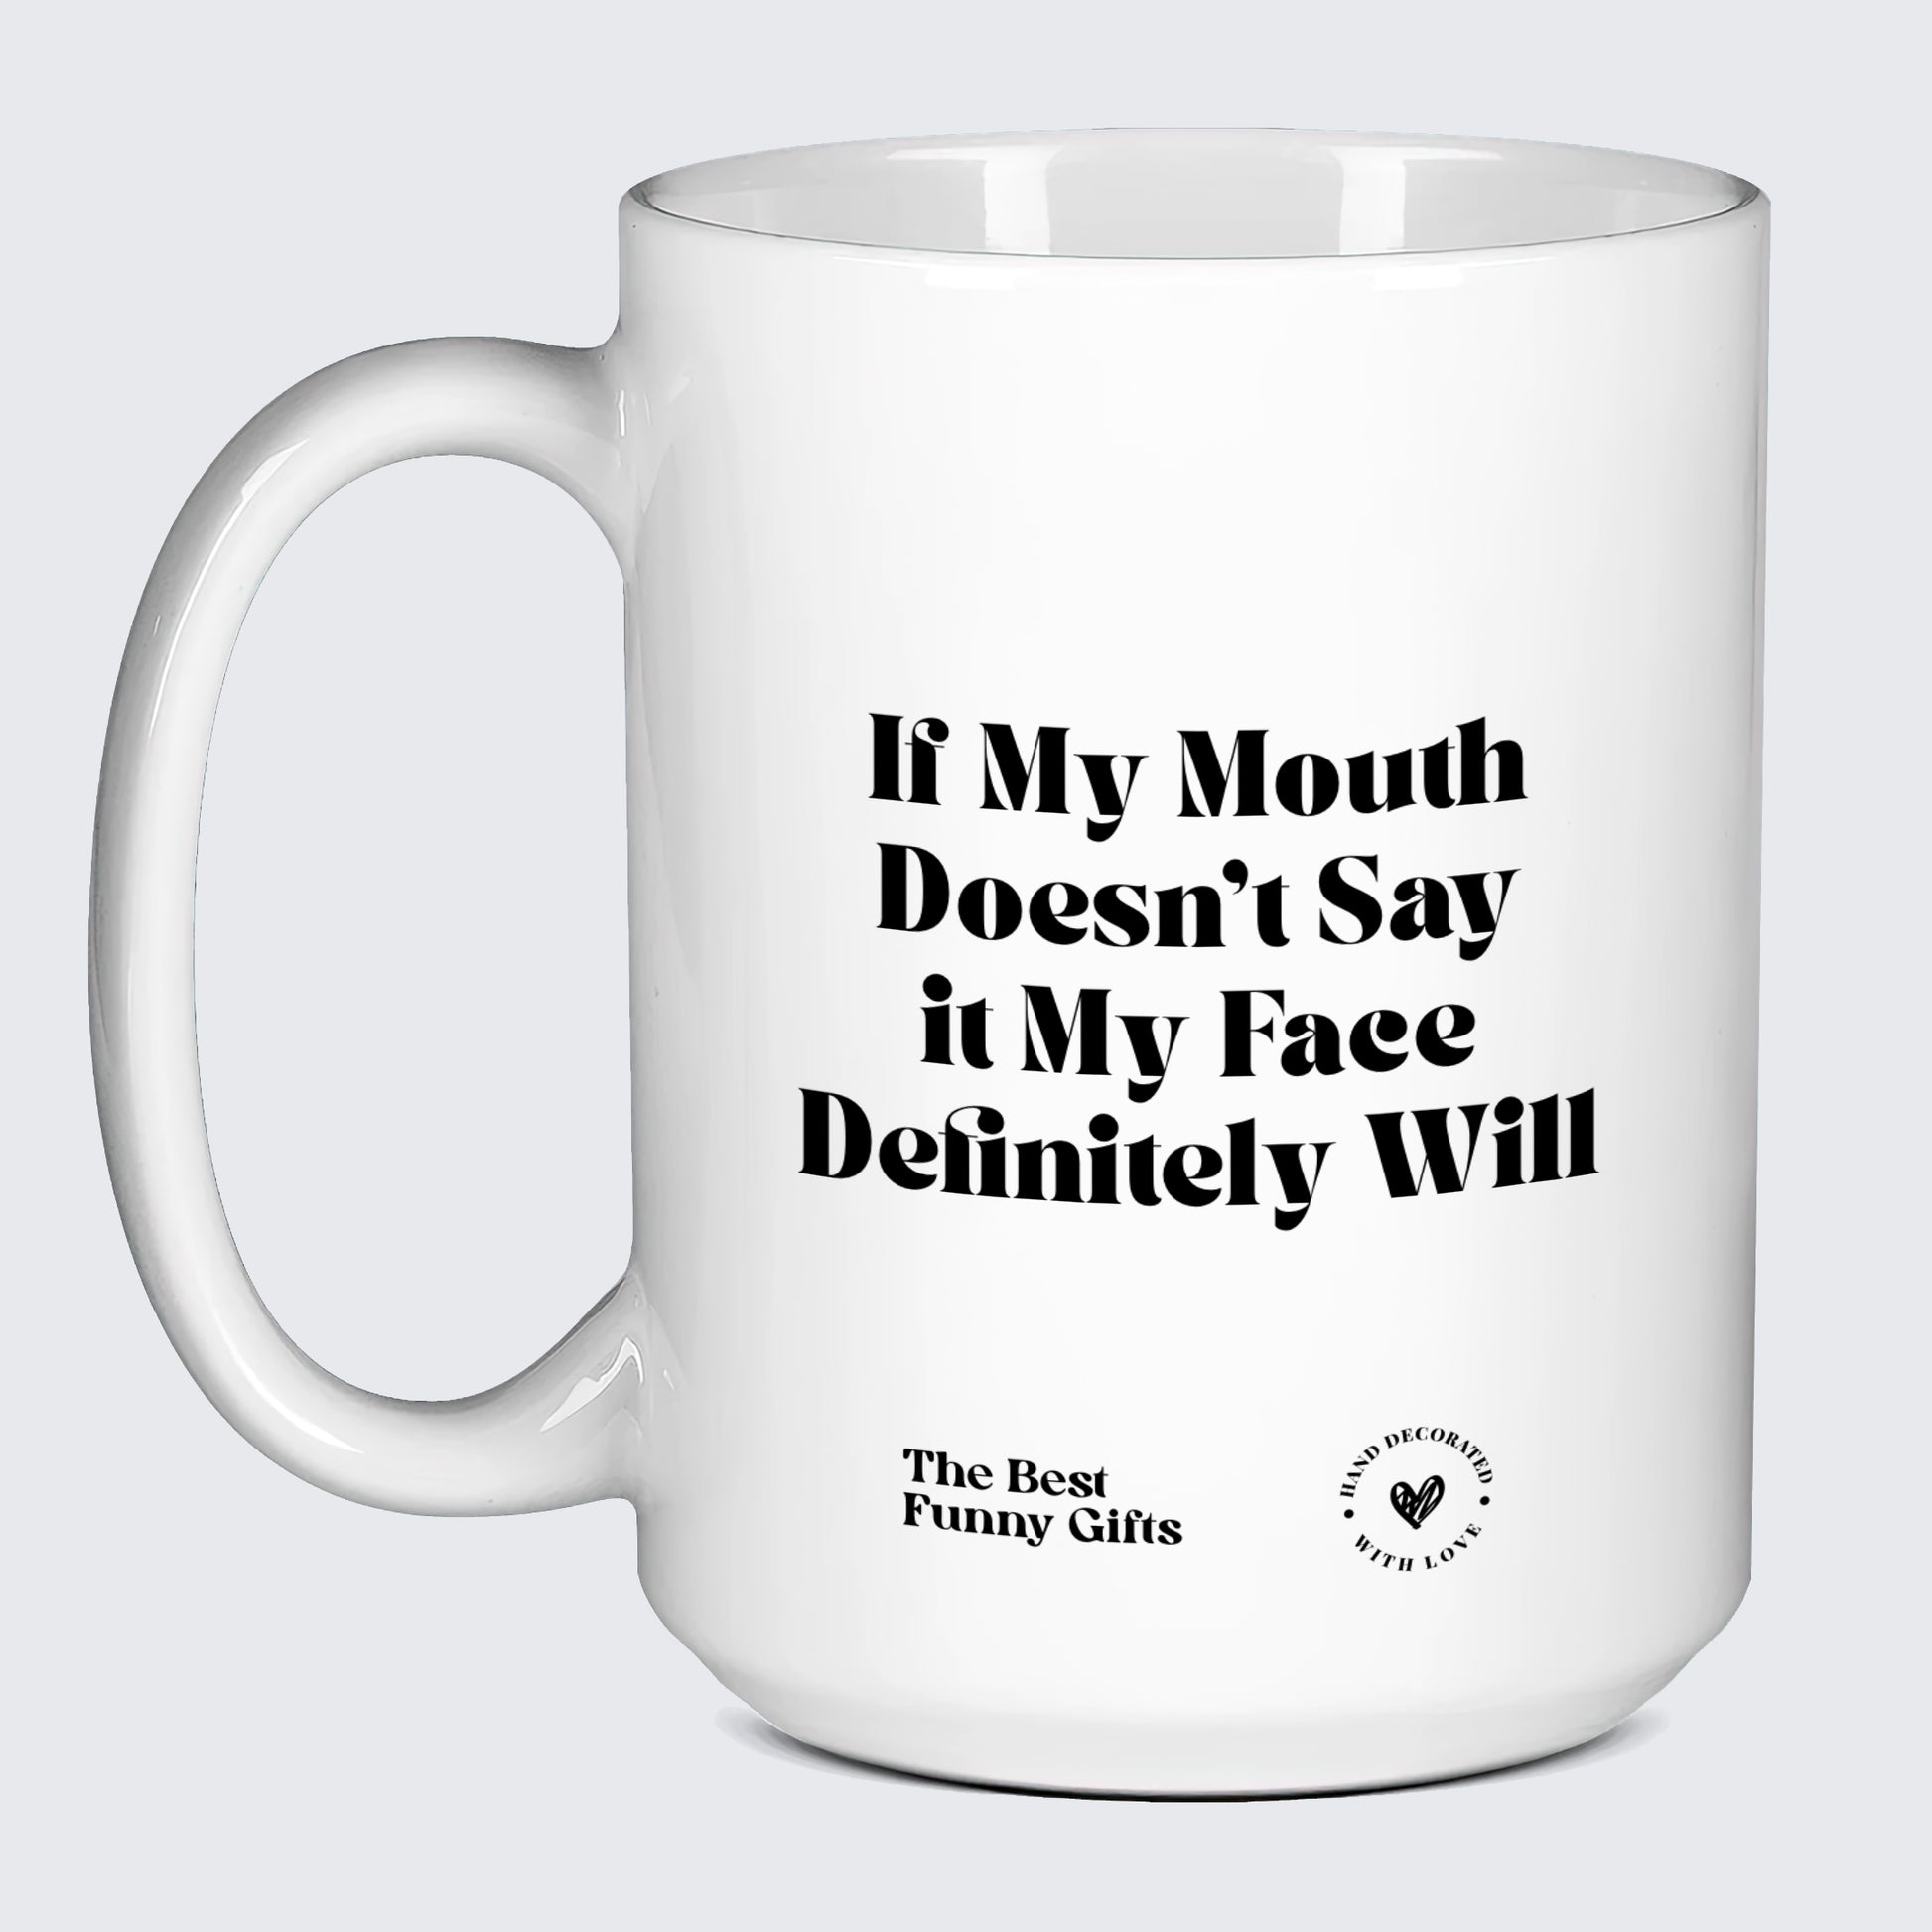 Funny Mugs If My Mouth Doesn't Say It My Face Definitely Will - The Best Funny Gifts